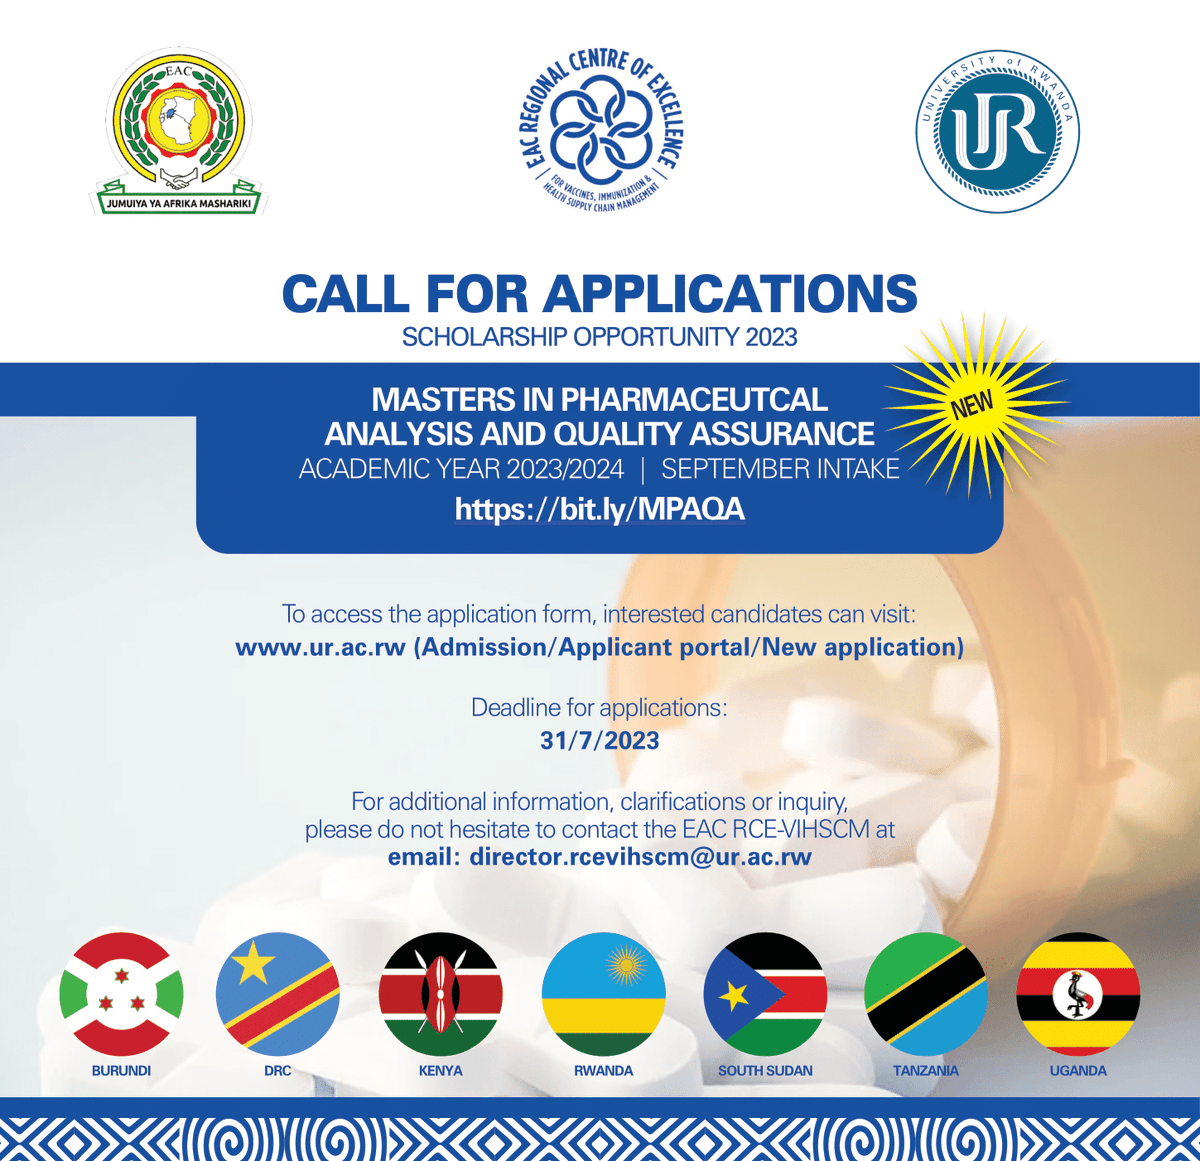 📢 NEW!! Are you passionate about access to quality medicines? We have you covered! Excited to announce our new master’s programme with fully covered scholarships for East Africans. Learn more ➡️ bit.ly/MPAQA 📆Application deadline: 31/7/2023 #EAC @jumuiya @Uni_Rwanda